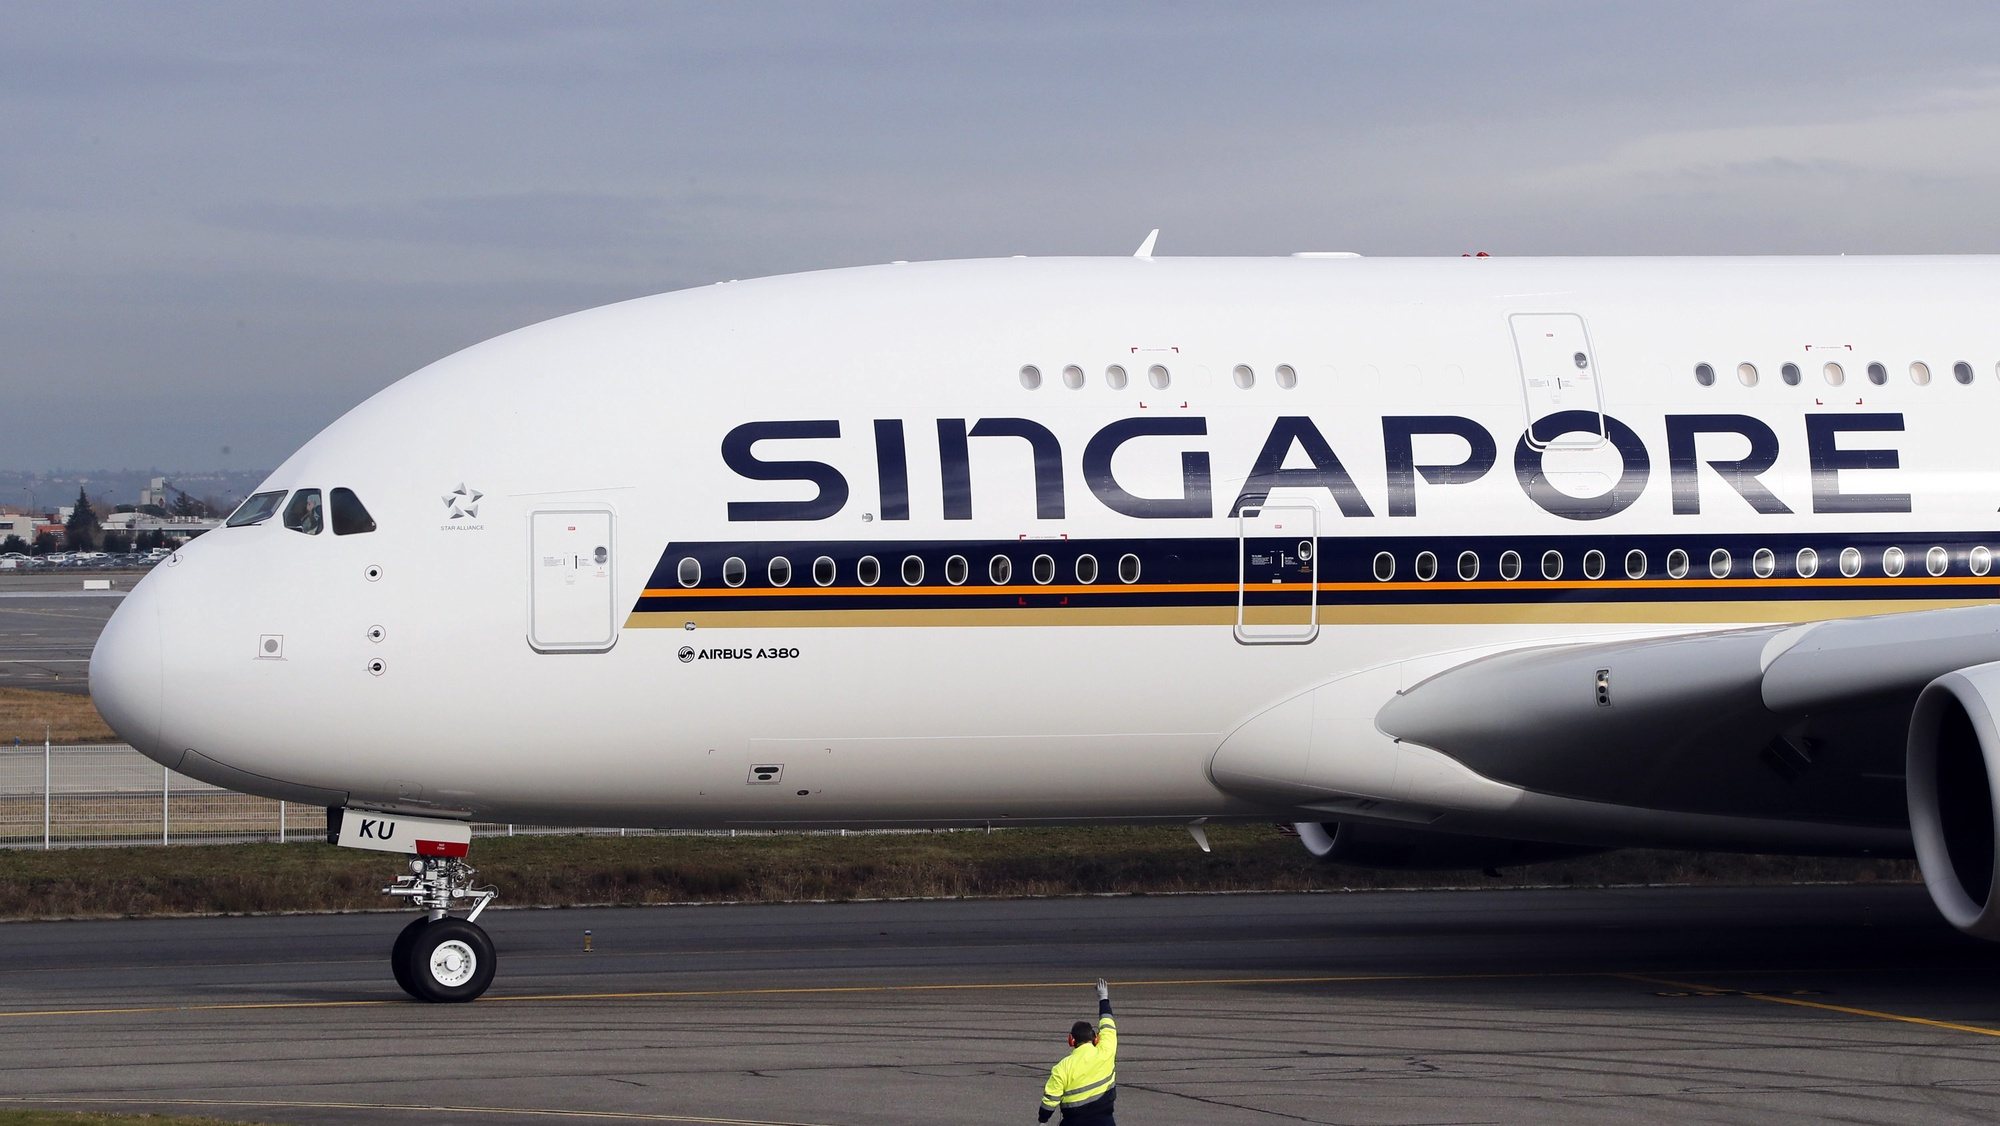 epa08314402 (FILE) - The new Airbus A380 Singapore Airlines plane prepares to take off at the Airbus&#039;s delivery center in Colomiers, near Toulouse, Southern France, 13 January 2017 (reissued 23 March 2020). Singapore Airlines (SIA) announced on 23 March that it will ground 96 percent of its fleet as countries worldwide tightened border controls amid the ongoing coronavirus pandemic crisis.  EPA/GUILLAUME HORCAJUELO